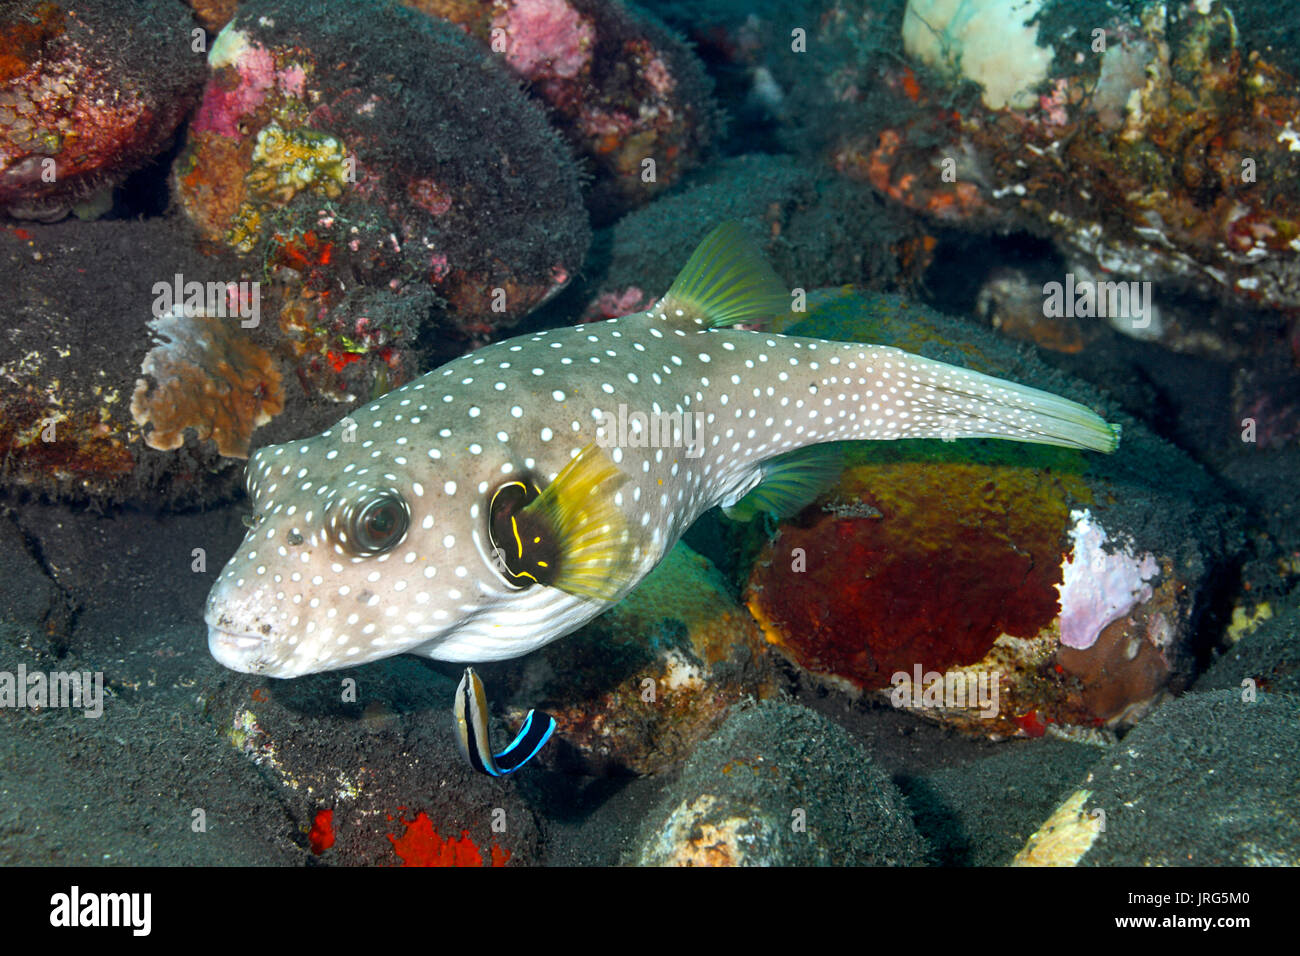 White Spotted Puffer, also known as Stars and Stripes Puffer, Arothron hispidus, being cleaned by a Blue Streak Cleaner Wrasse Labroides dimidiatus. Stock Photo